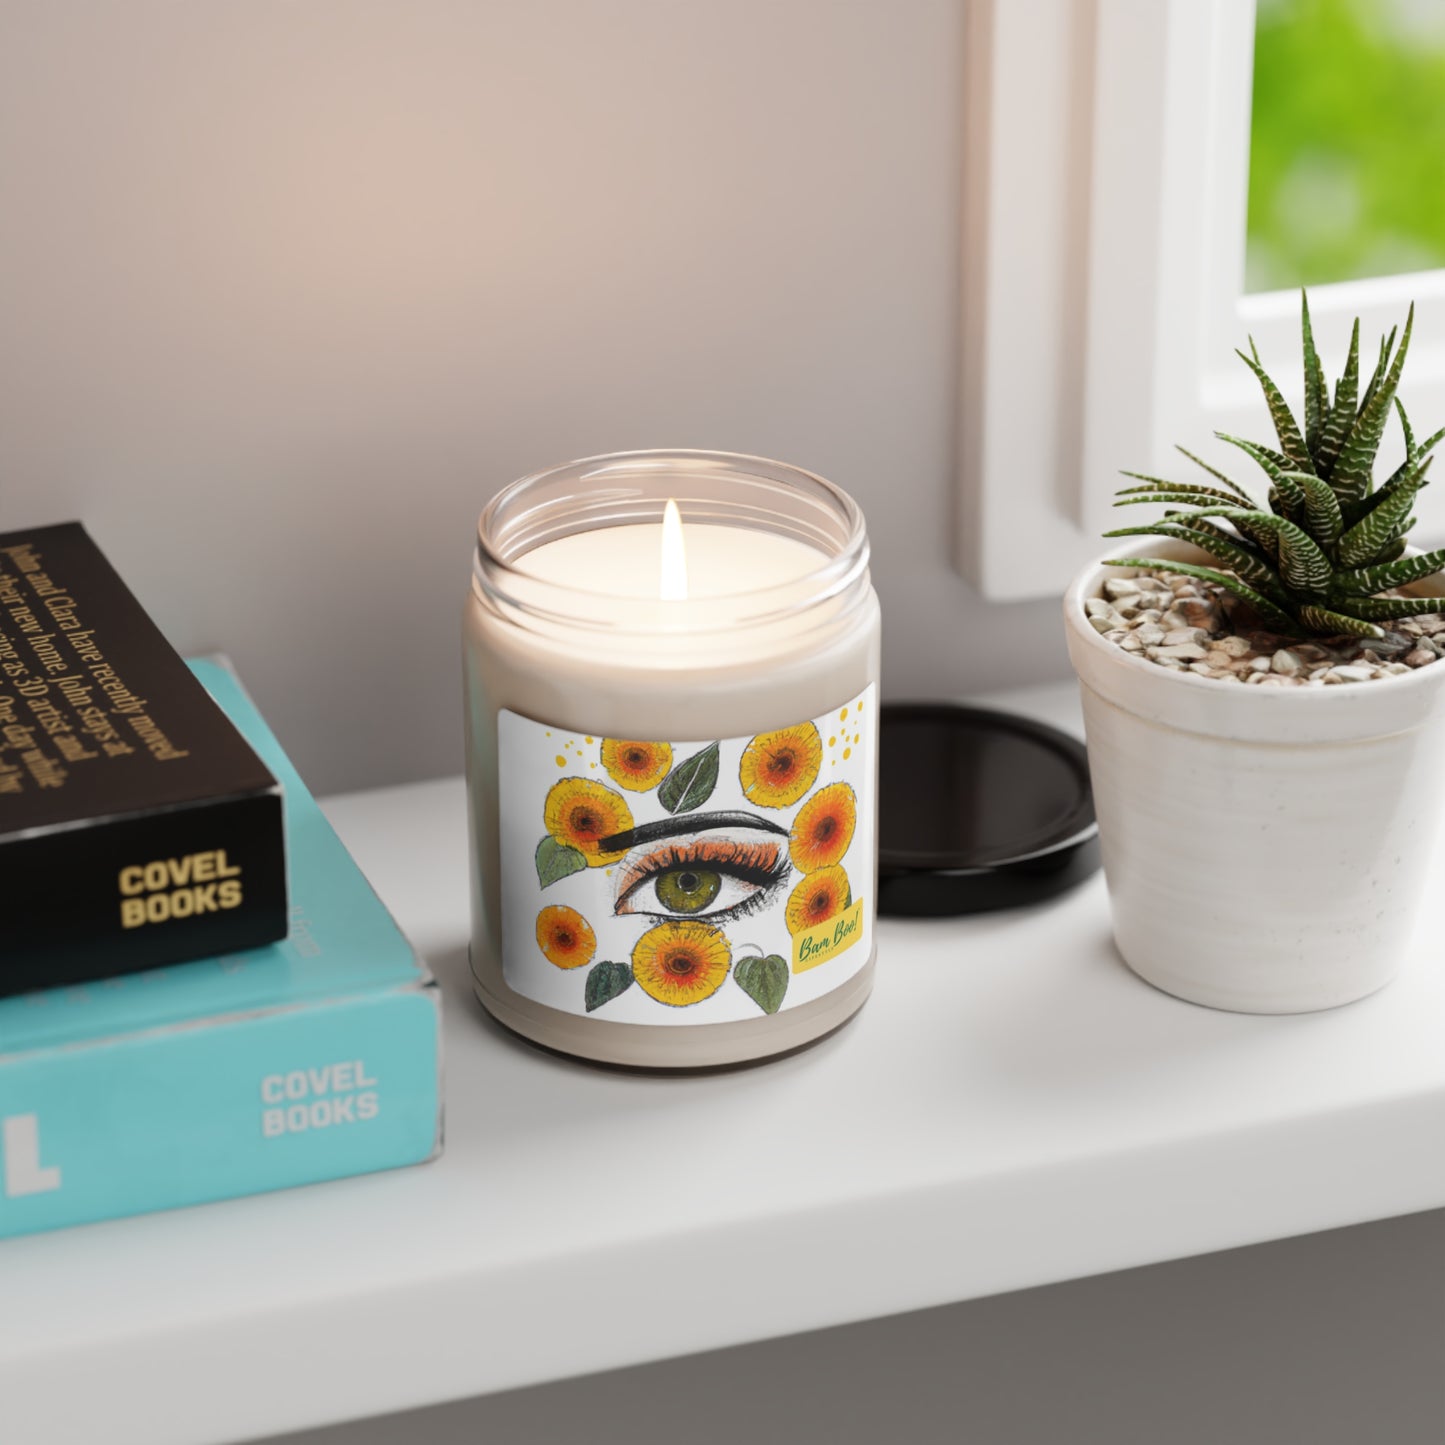 "Serendipitous Artistry: A Blend of Old and New" - Bam Boo! Lifestyle Eco-friendly Soy Candle